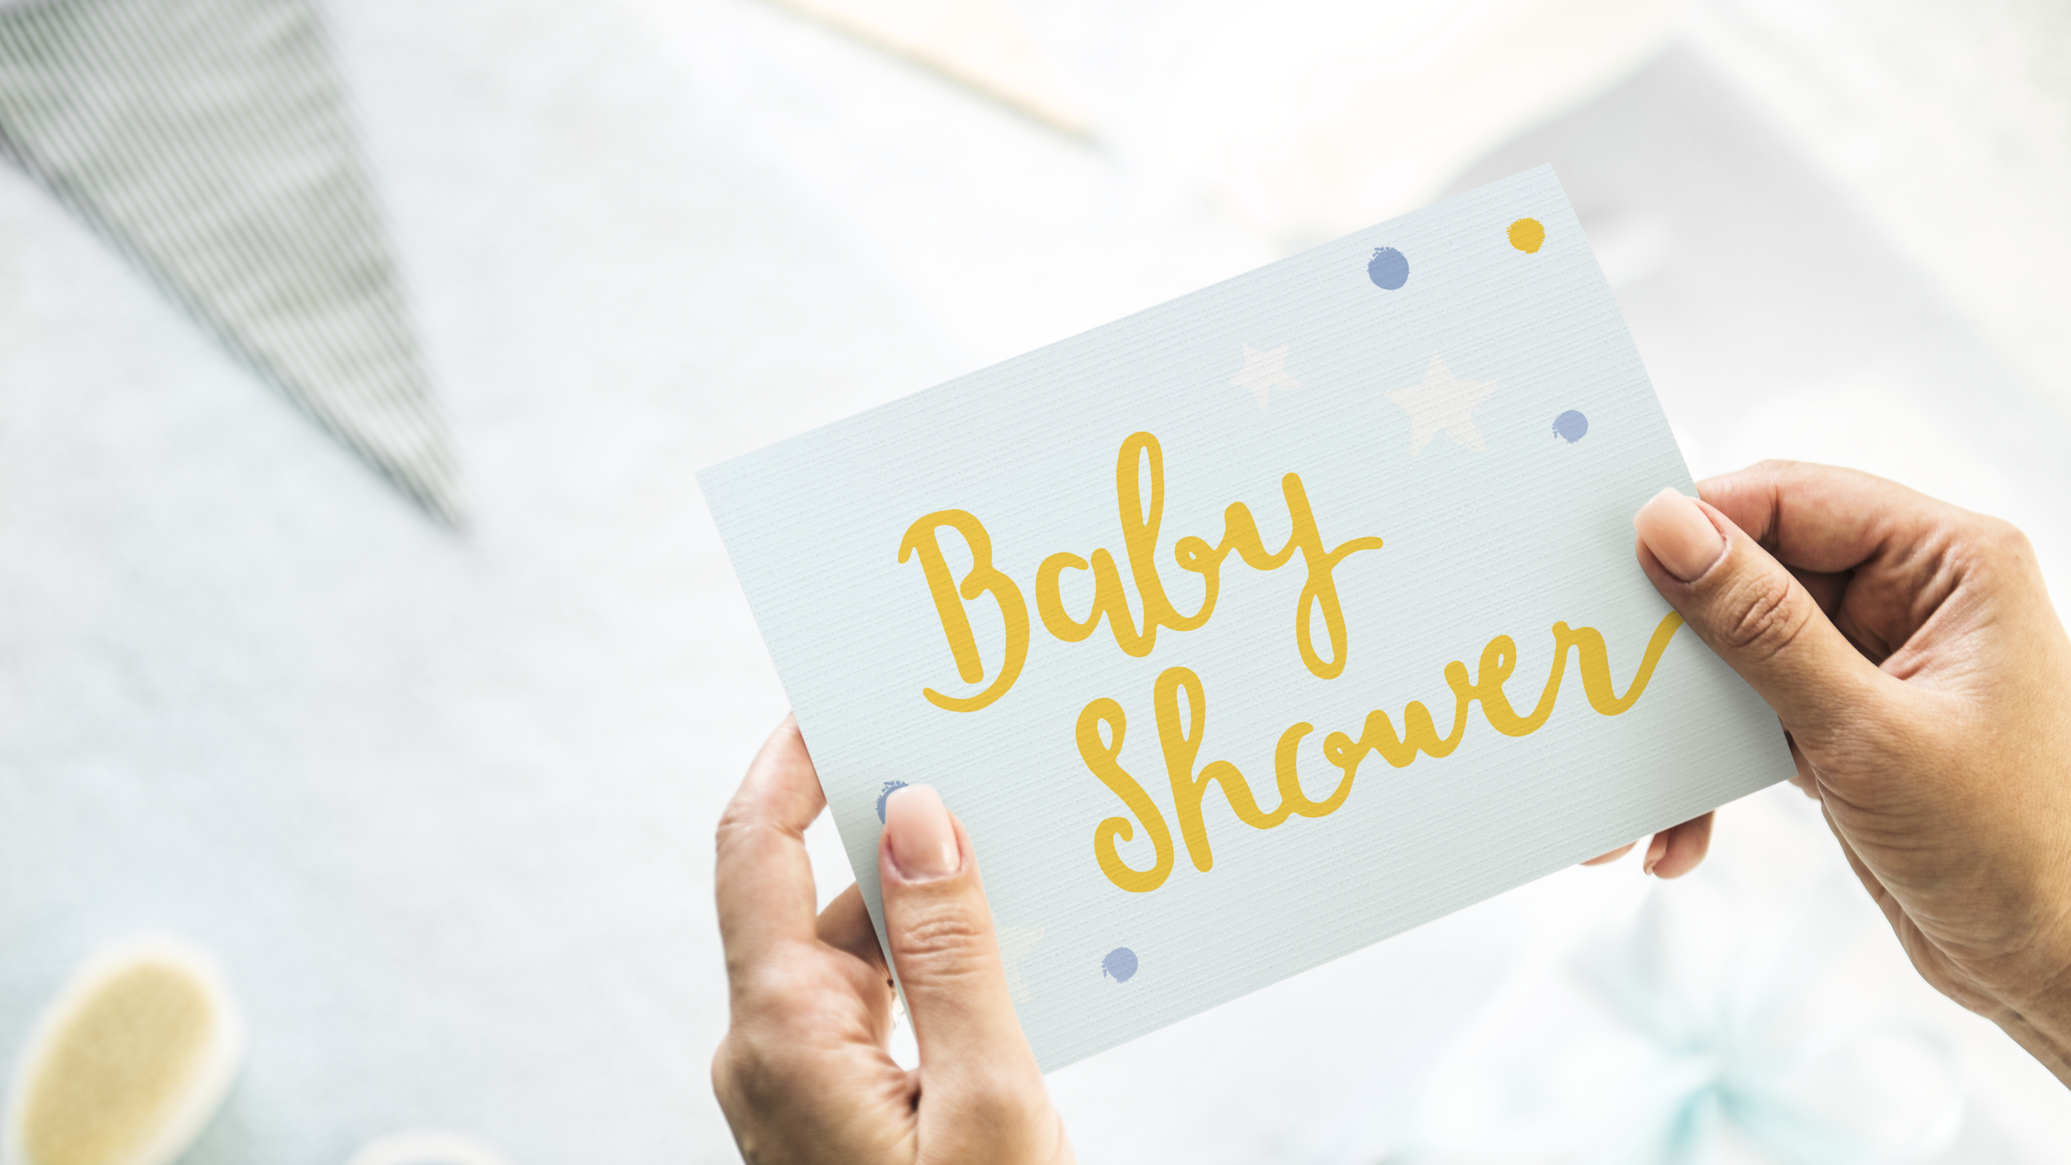 https://hips.hearstapps.com/hmg-prod/images/what-to-write-baby-shower-card-1657247374.png?crop=1xw:0.8050708362128541xh;center,top